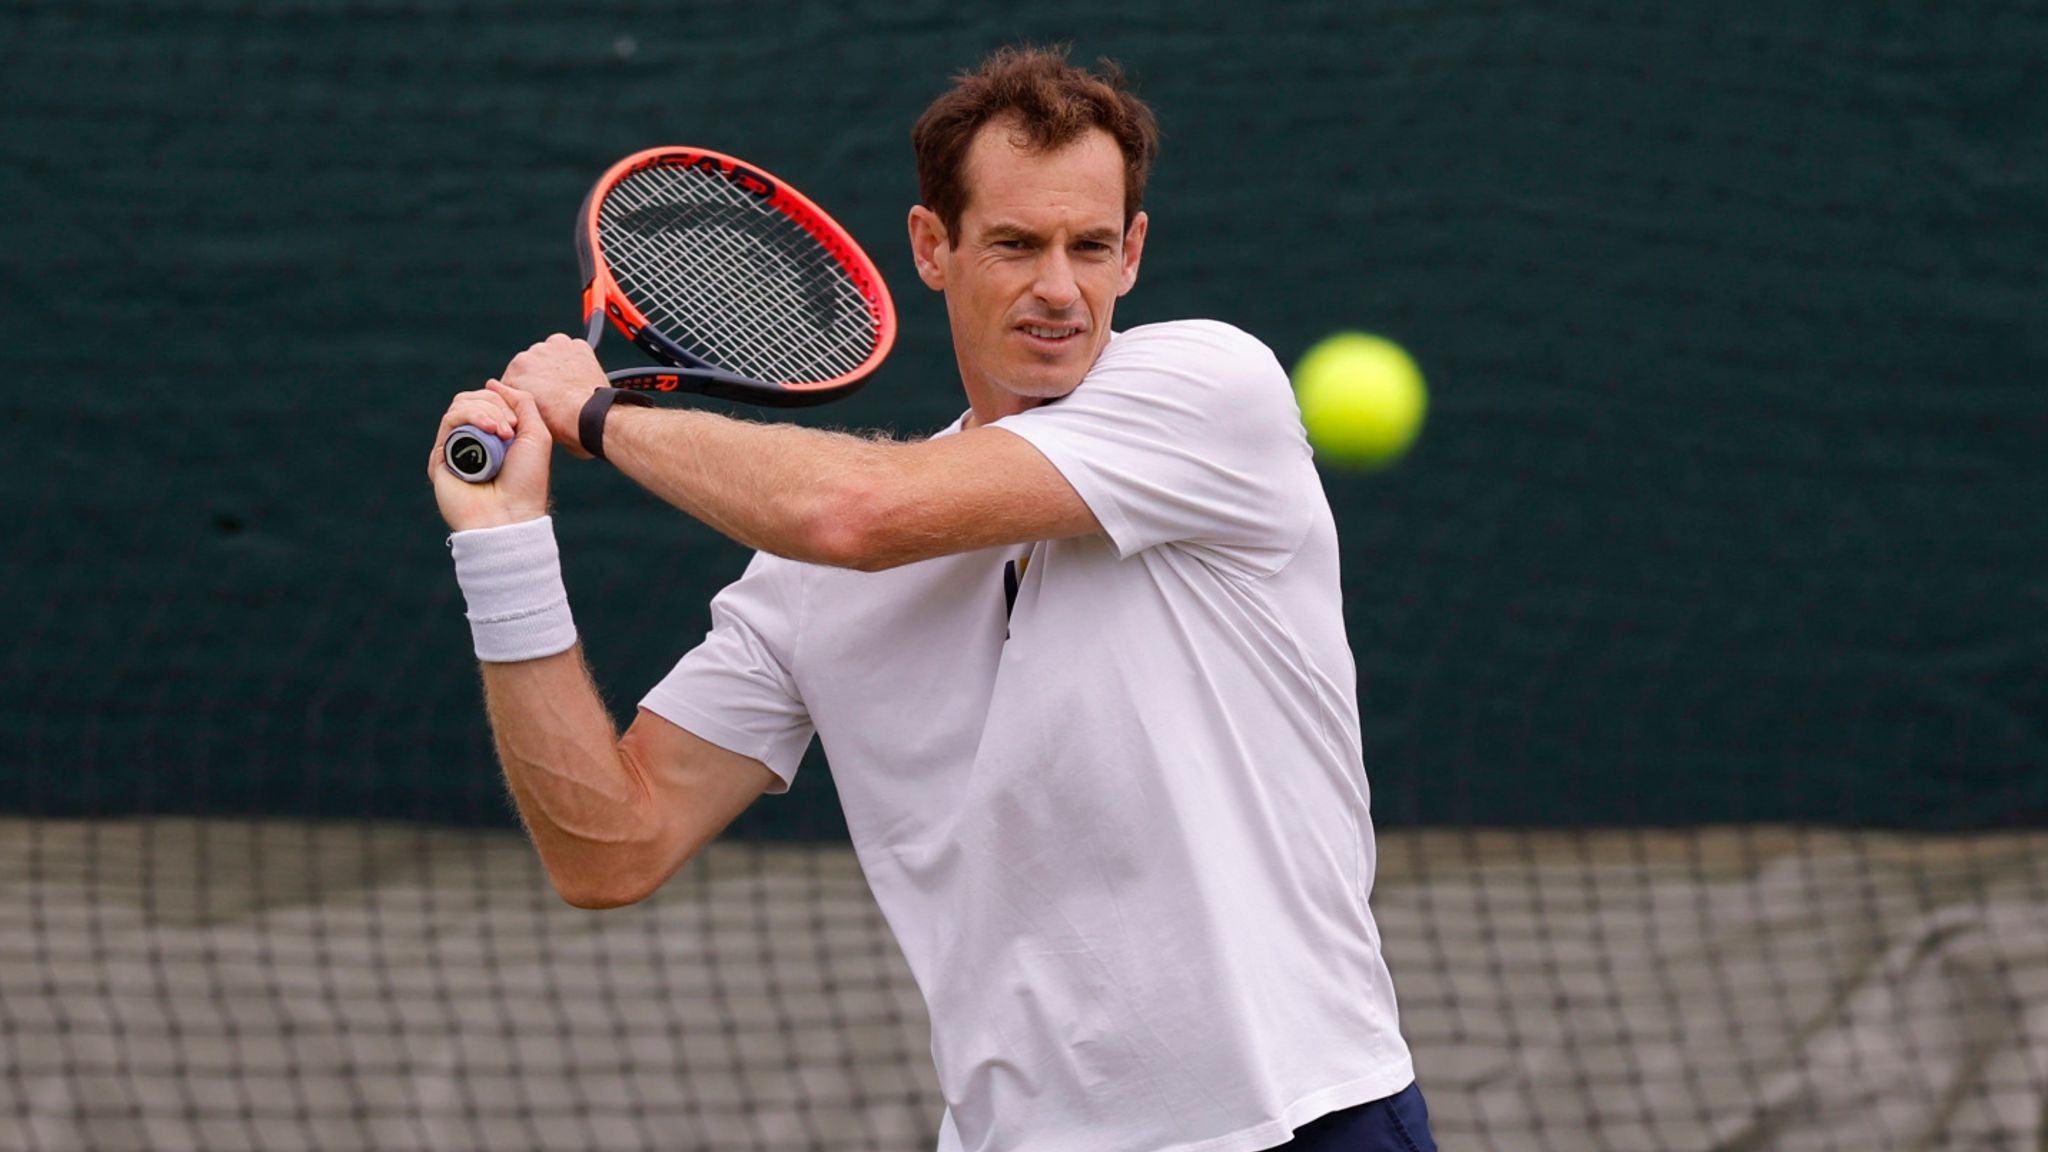 Andy Murray Children - Does Andy Murray have children?